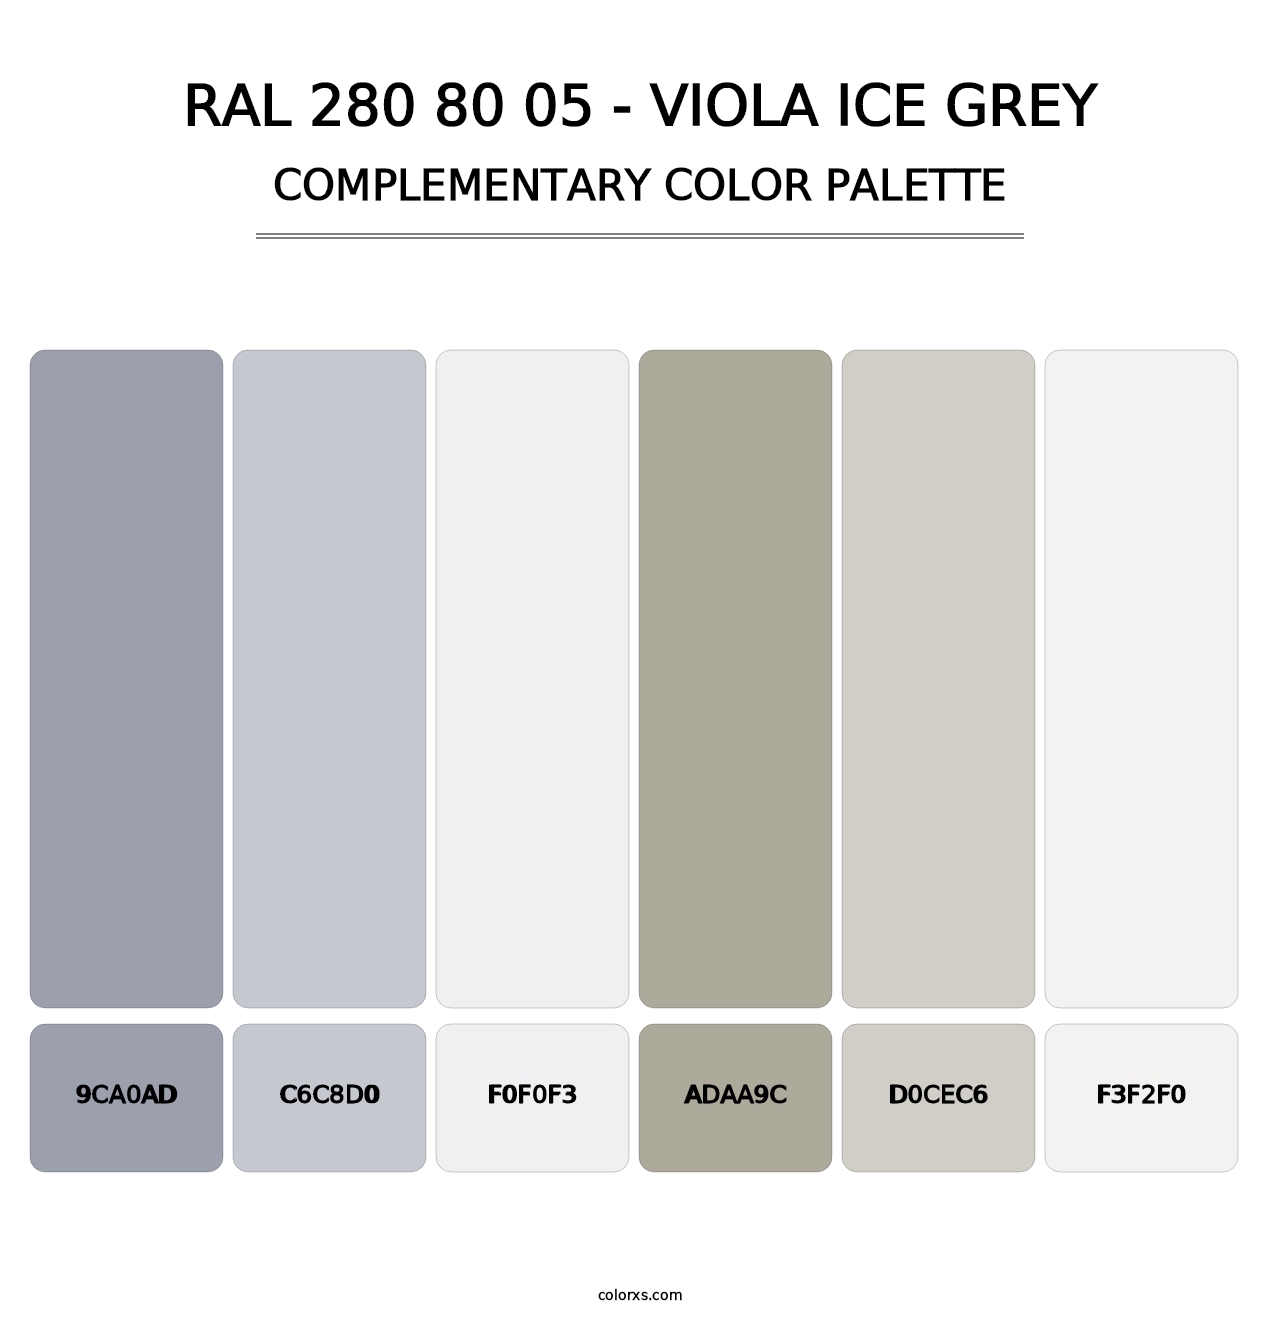 RAL 280 80 05 - Viola Ice Grey - Complementary Color Palette